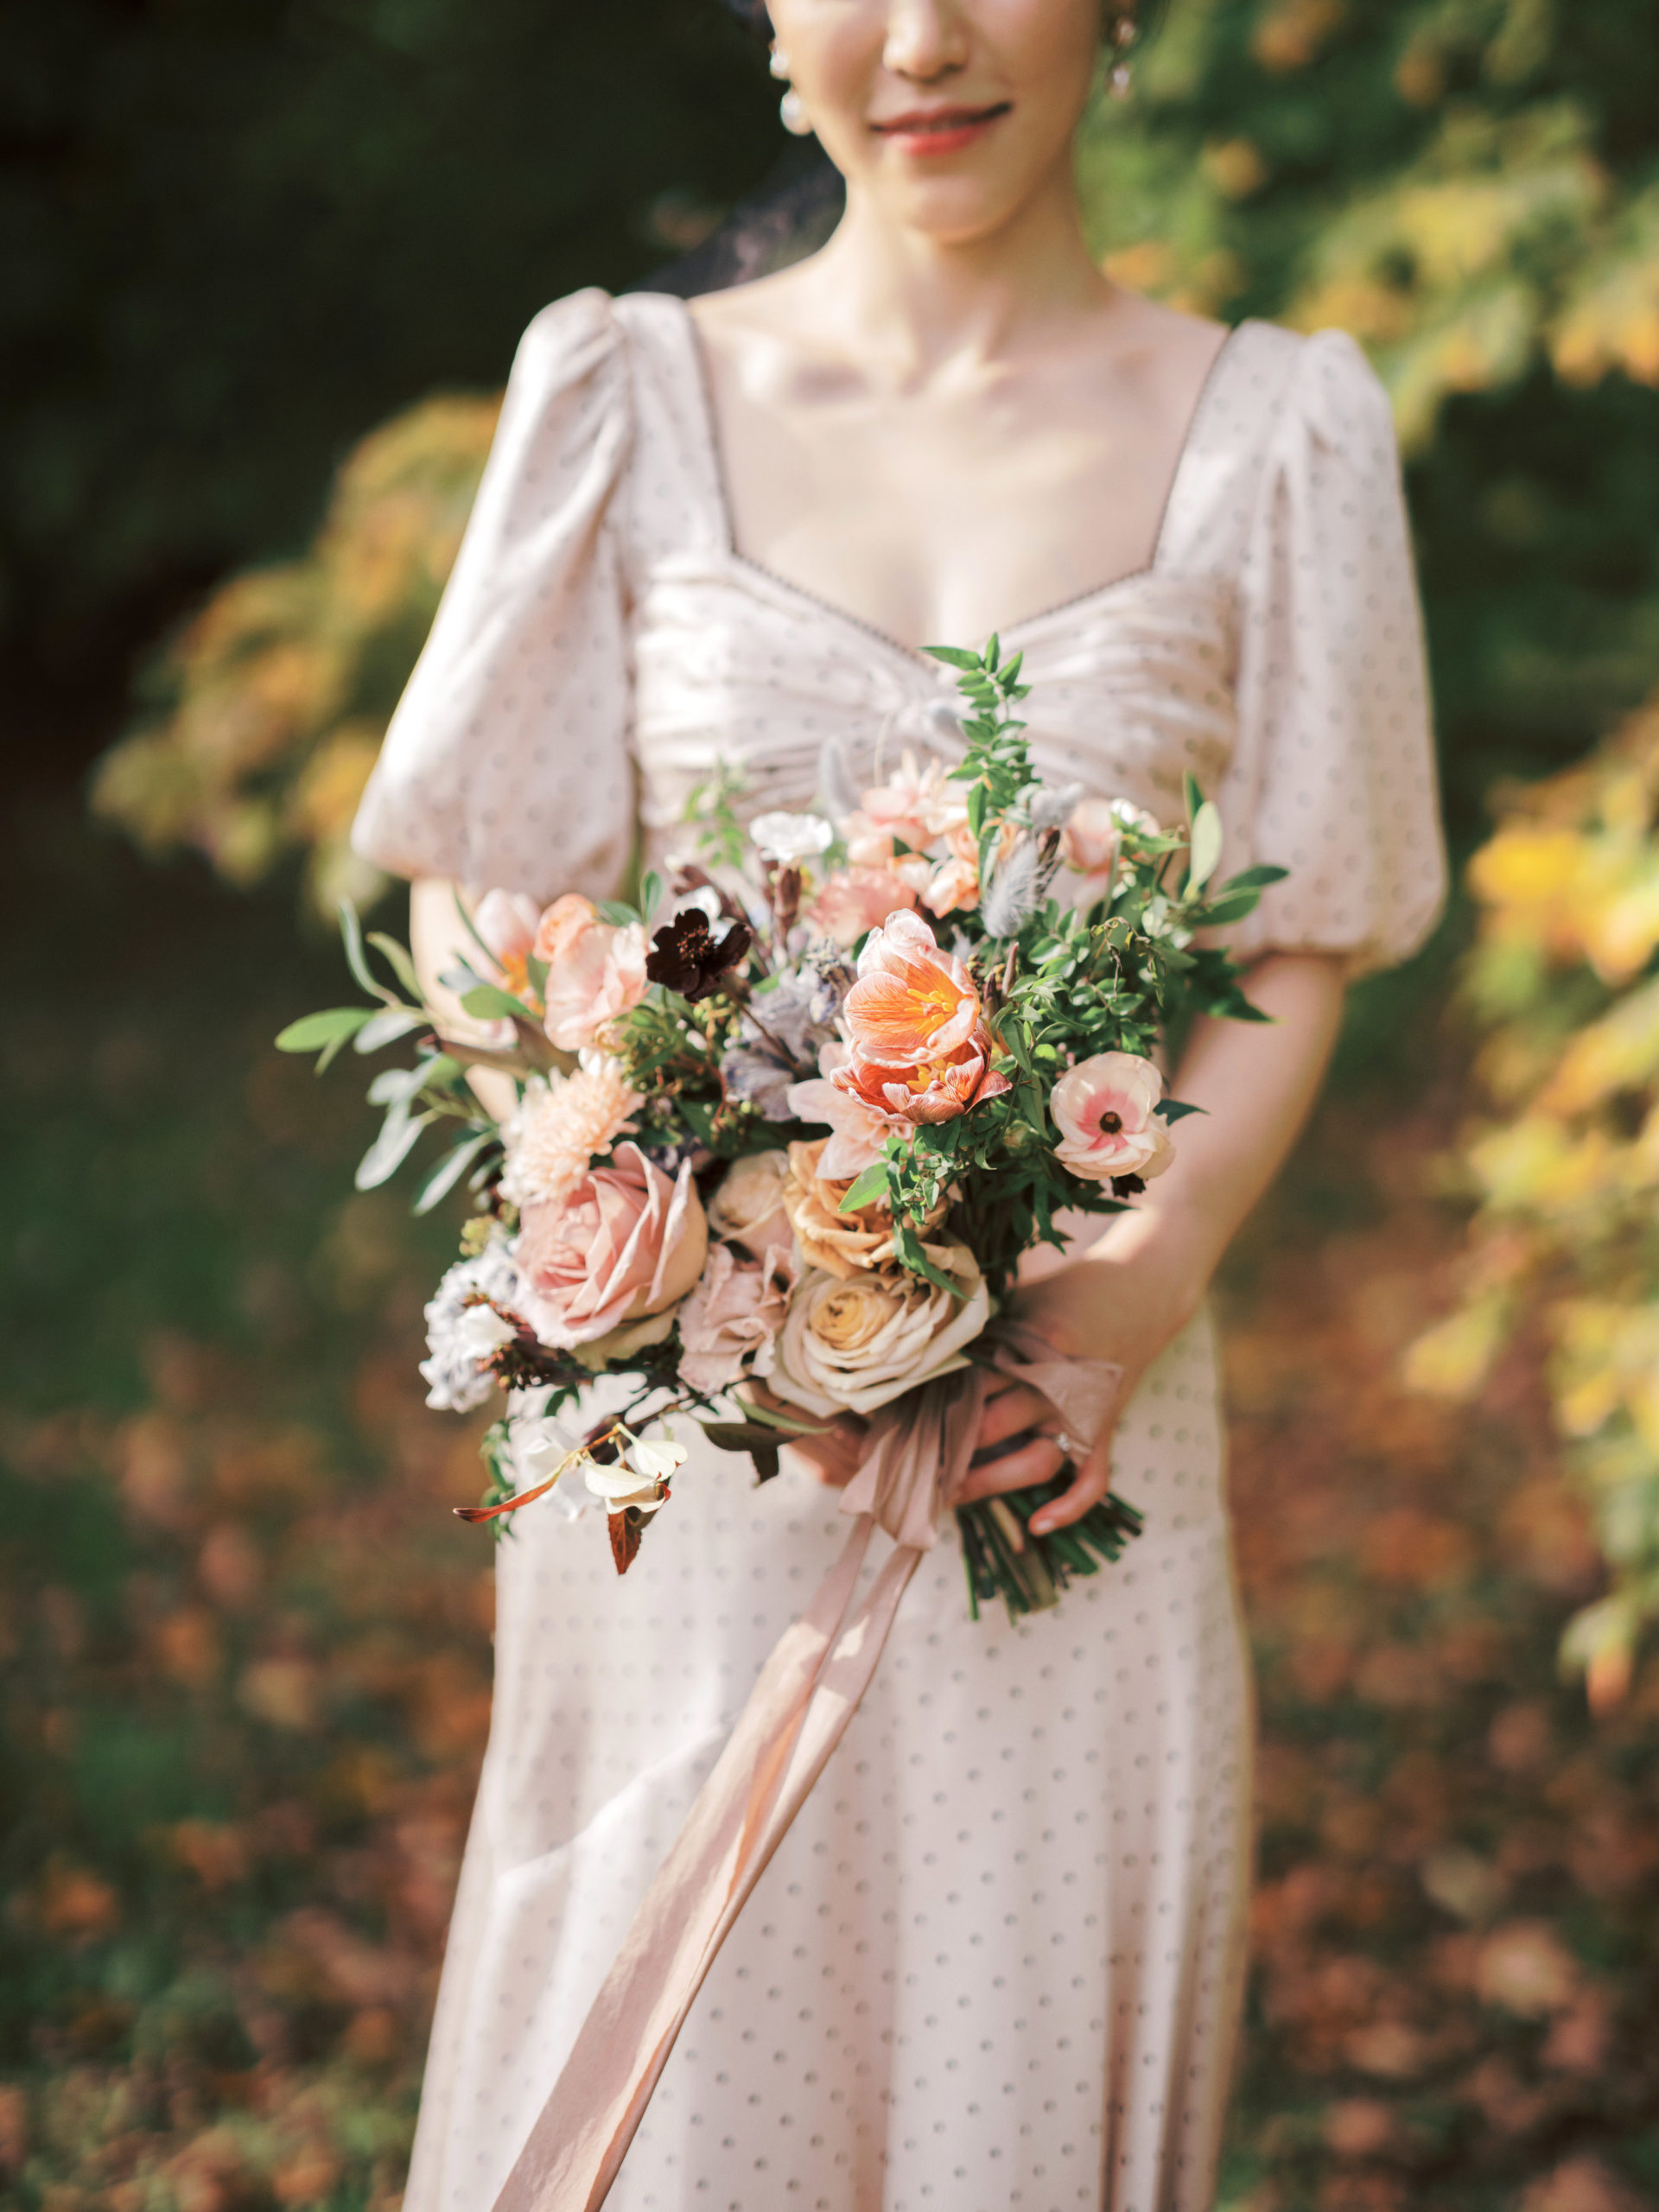 The fiancée is holding a bouquet of beautiful flowers. Engagement session photo by Jenny Fu Studio